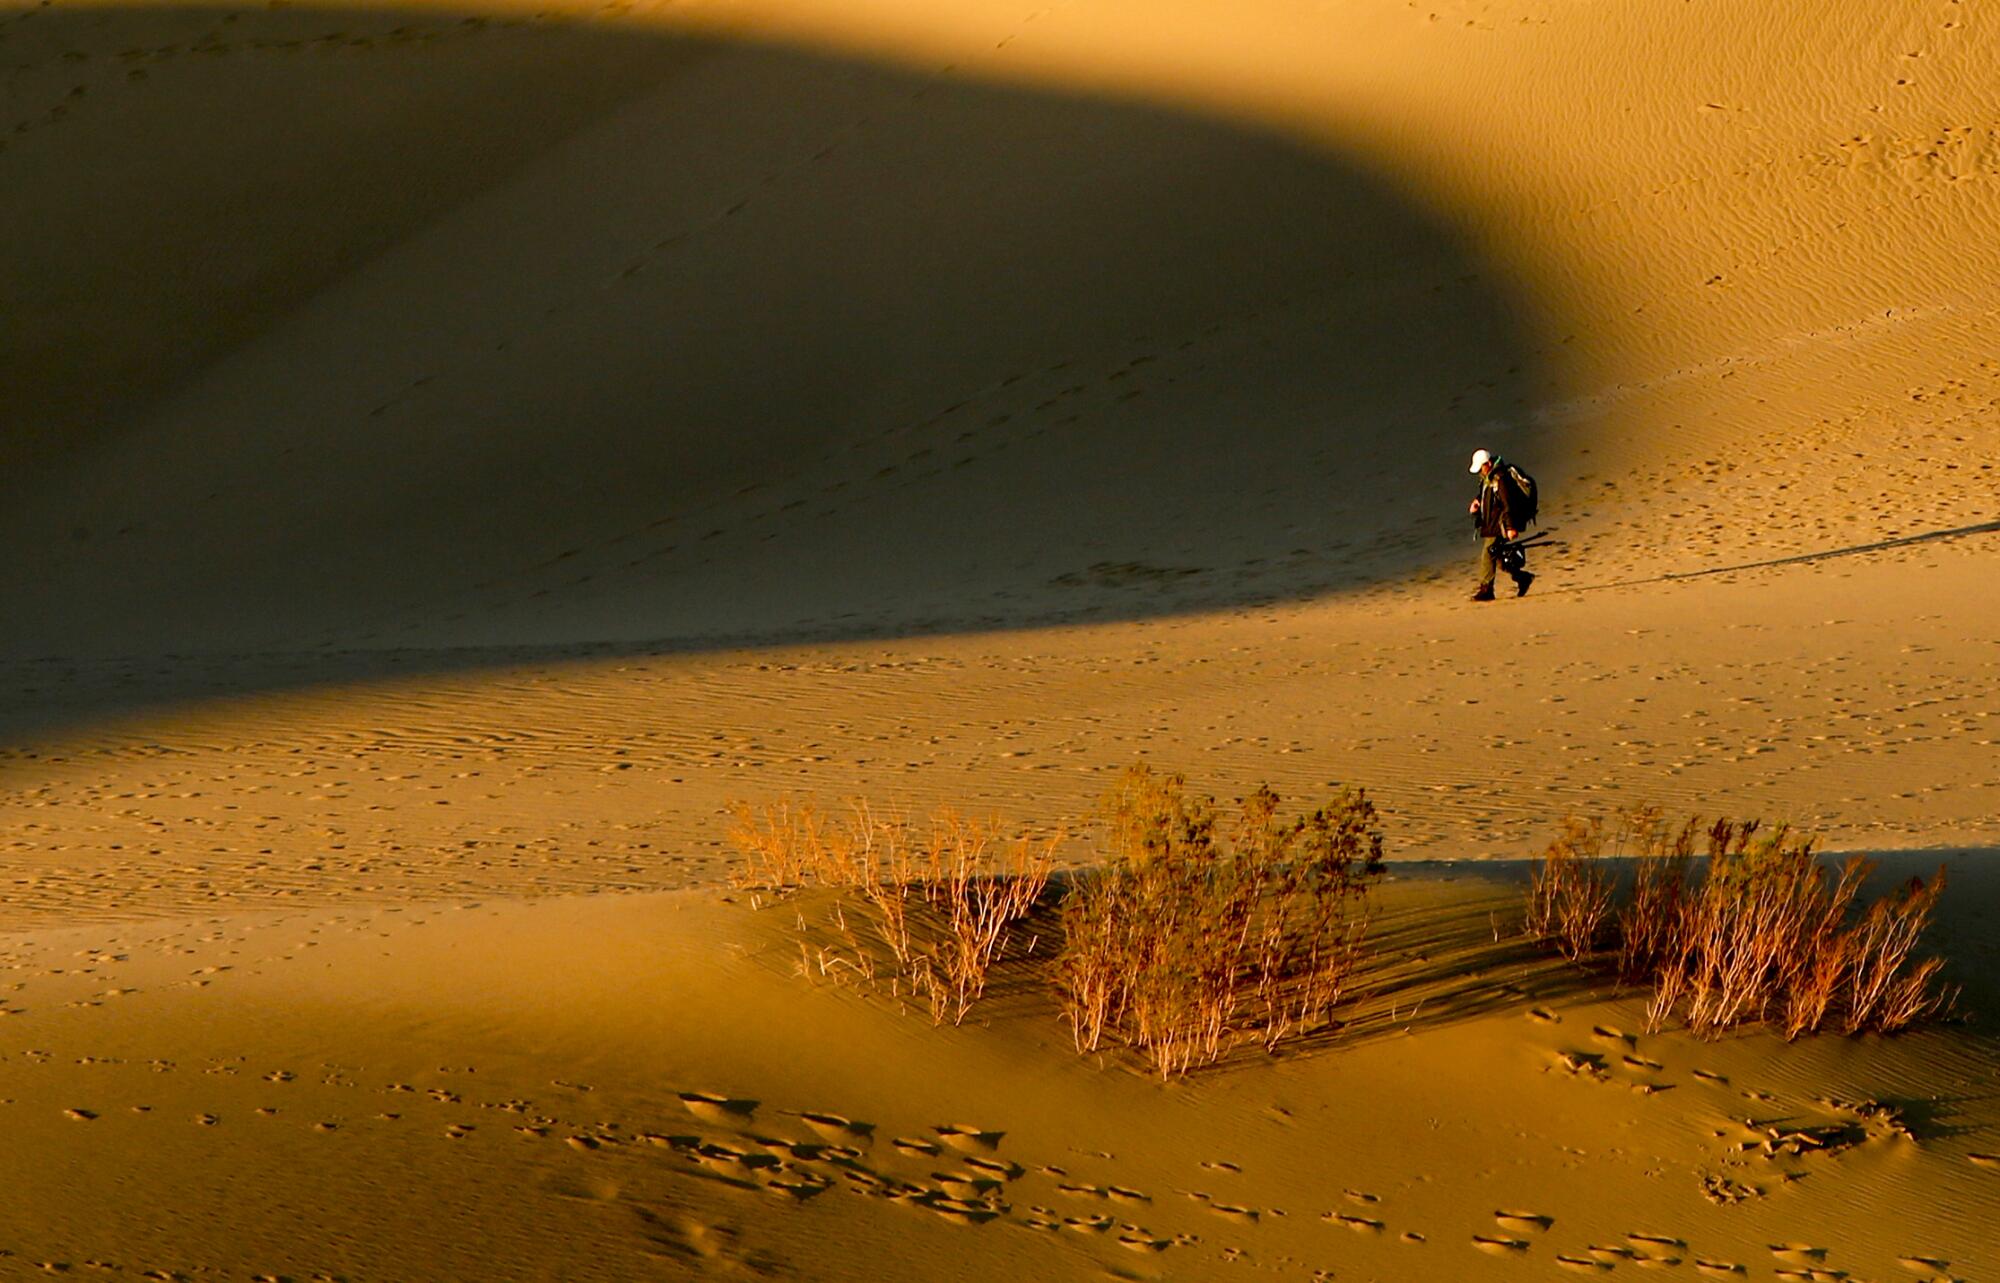 A Lone Man Was Walking Across The Sand.